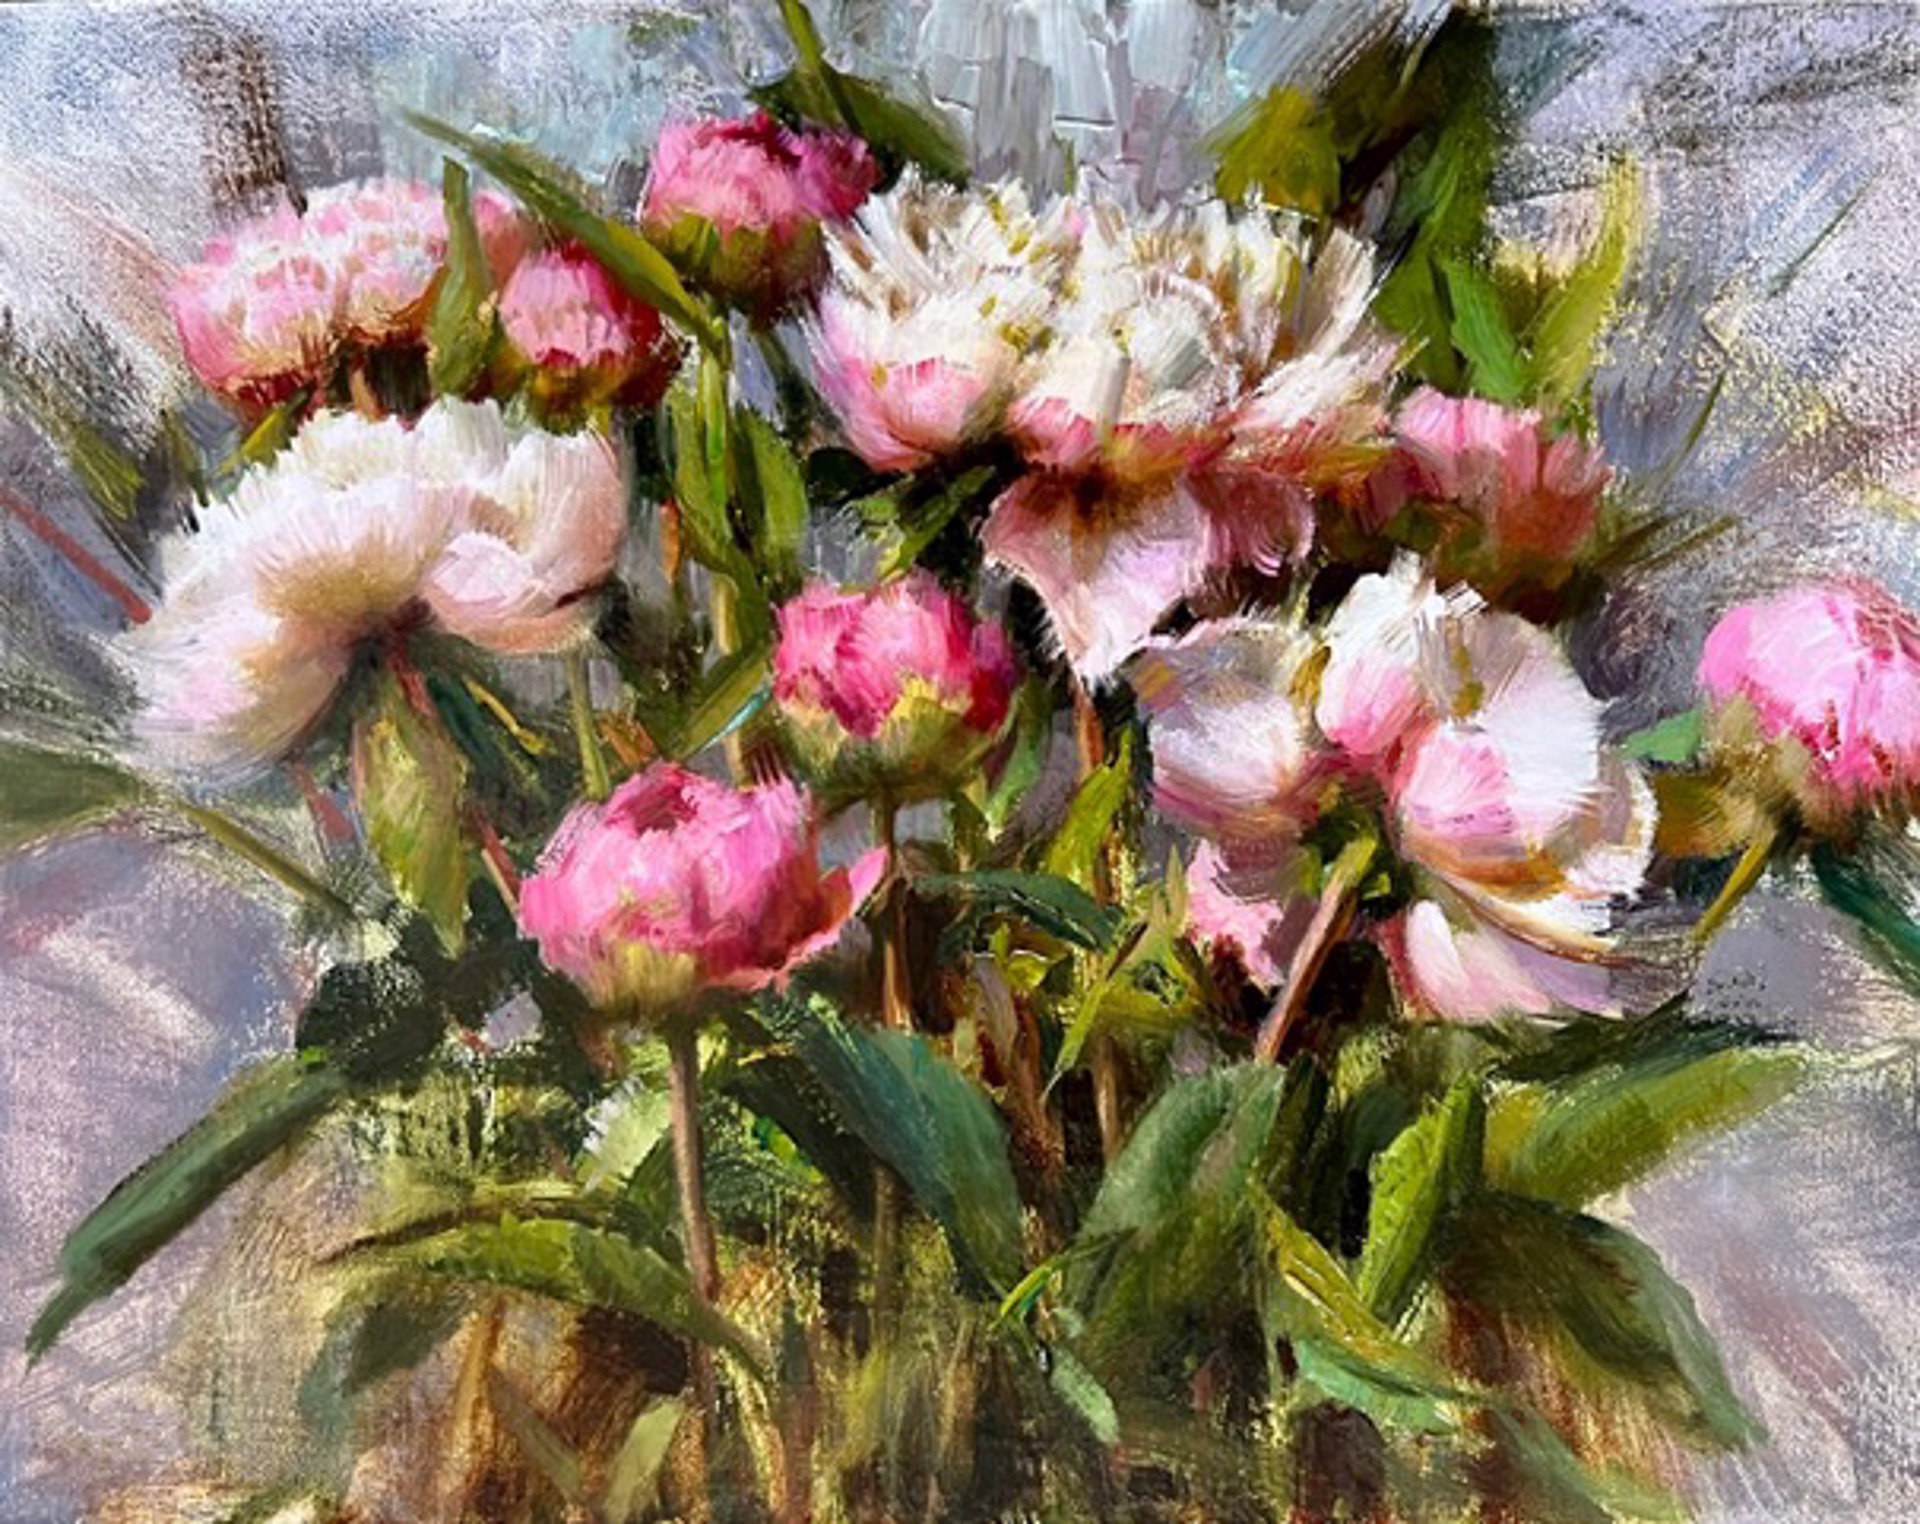 "Pink and Cream Peonies" by Stacy Barter